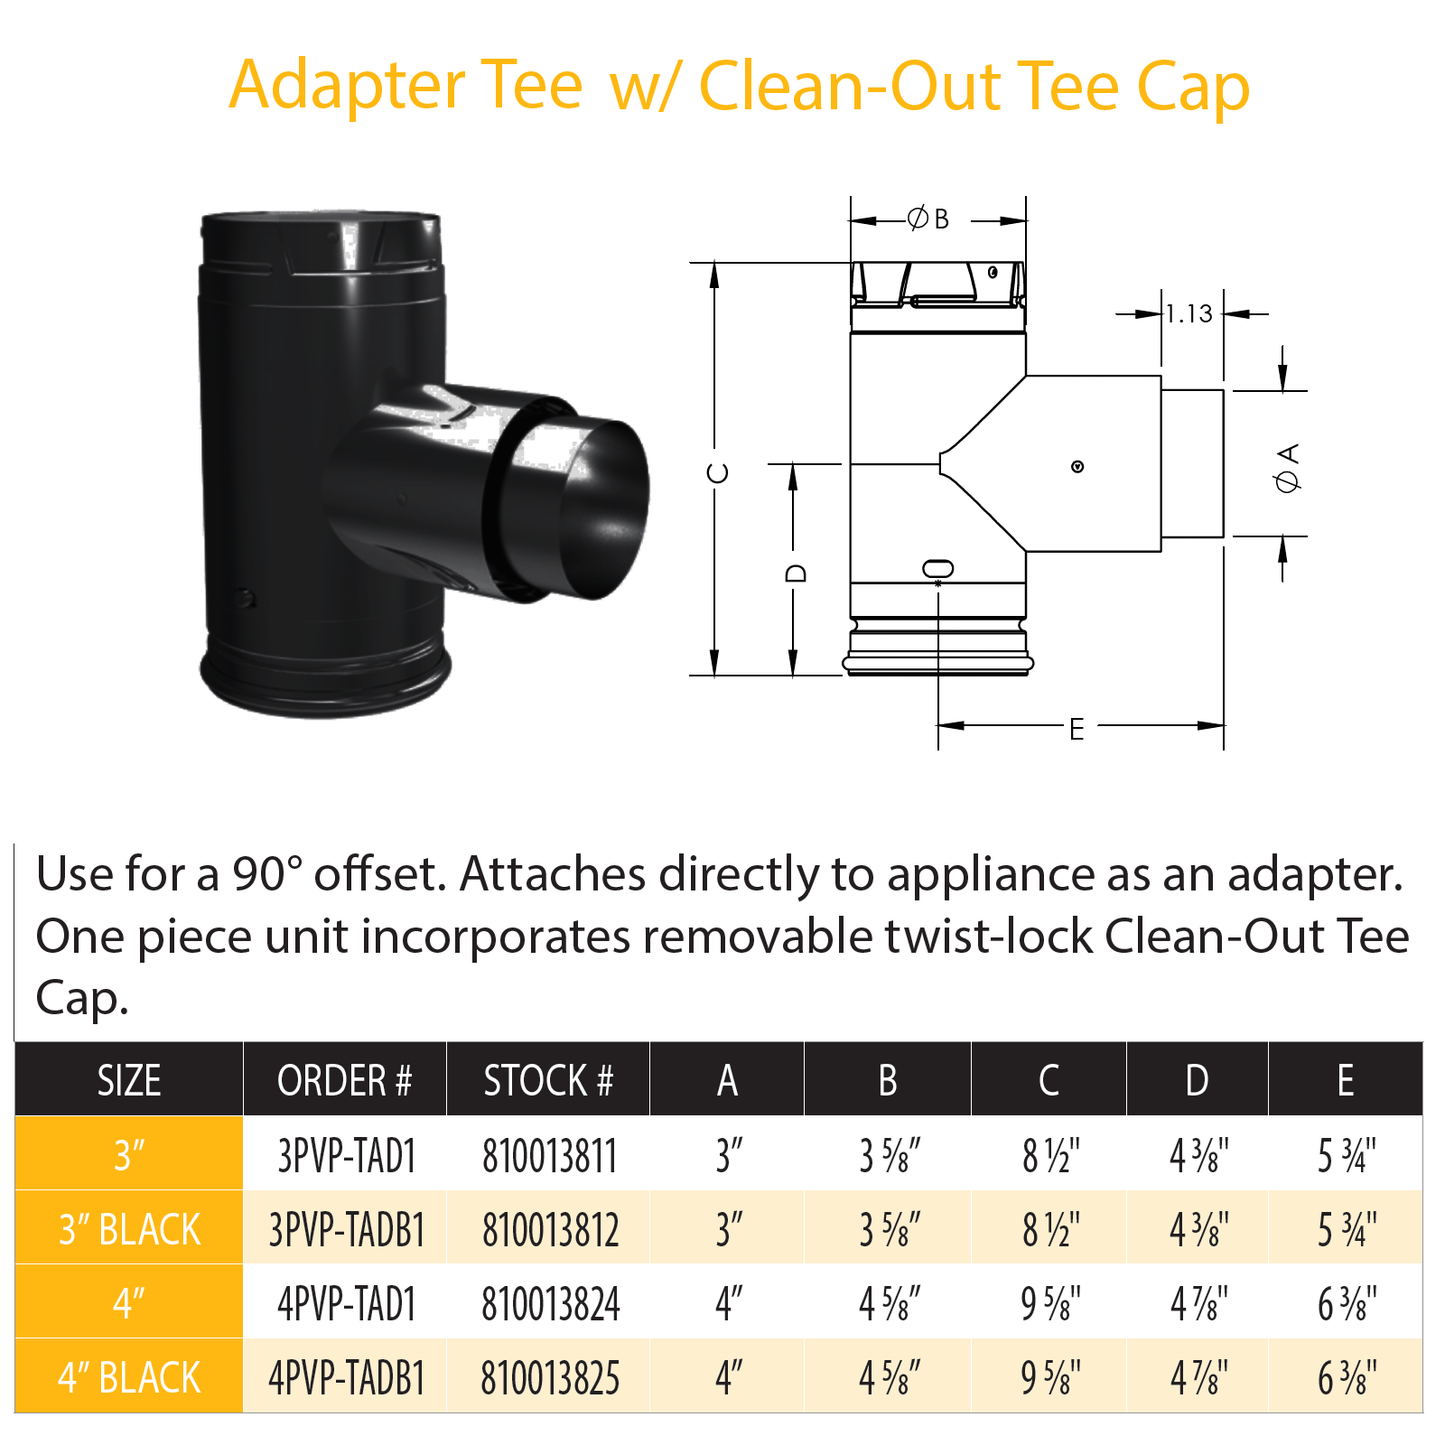 DuraVent PVP Adapter Tee w/Clean-Out Tee Cap | 3PVP-TADB1